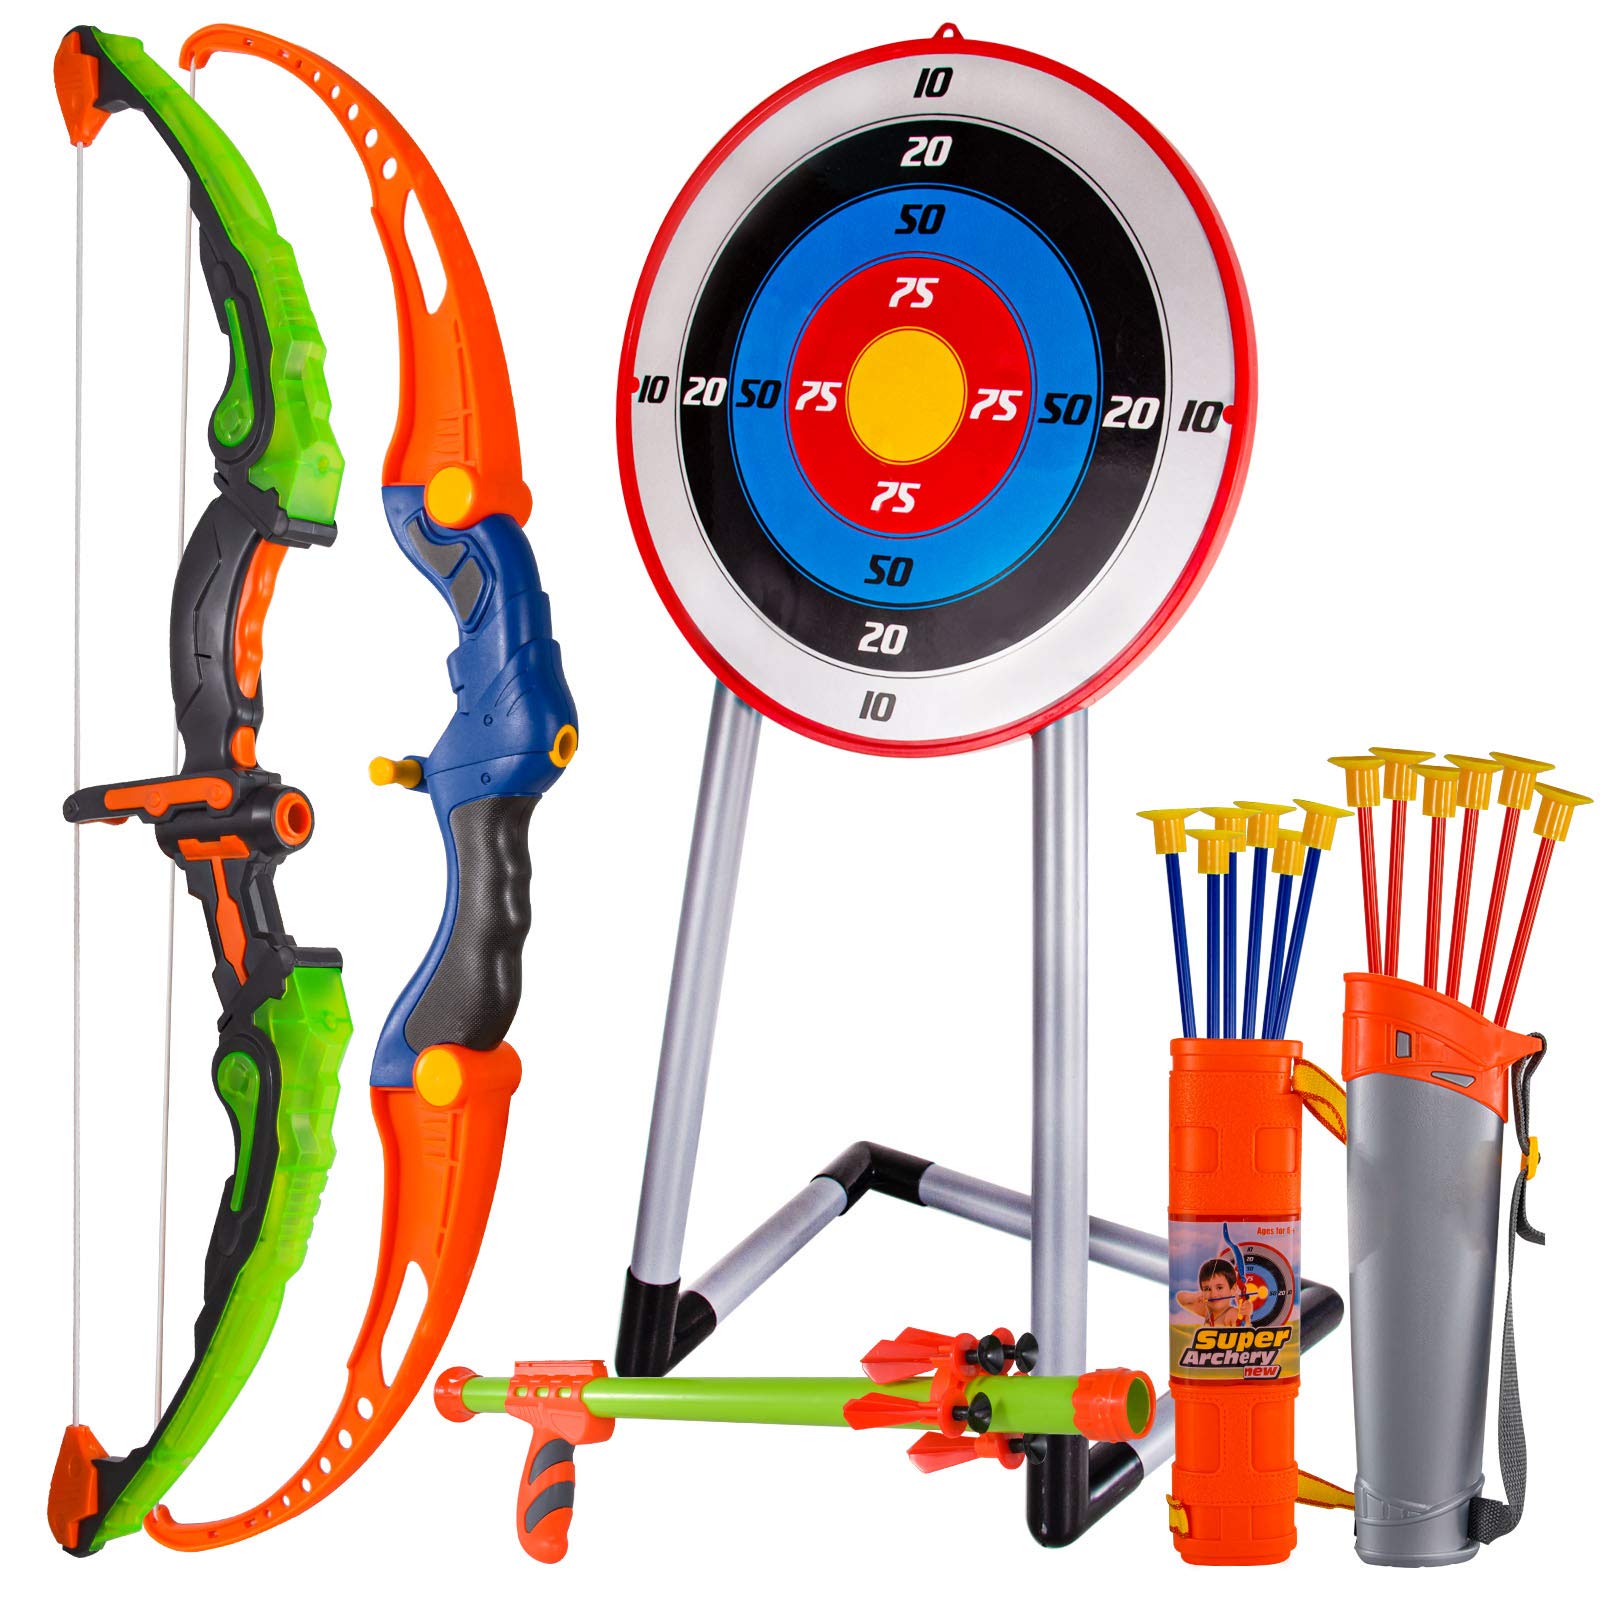 CAPTAIN CHAOWING Bow and Arrow for Kids, Archery Toy Set, 2 Bows & 1 Blowing Bow & 12 Arrows & 5 Quivers & Standing Target, Outdoor Toys for Children Boys Girls